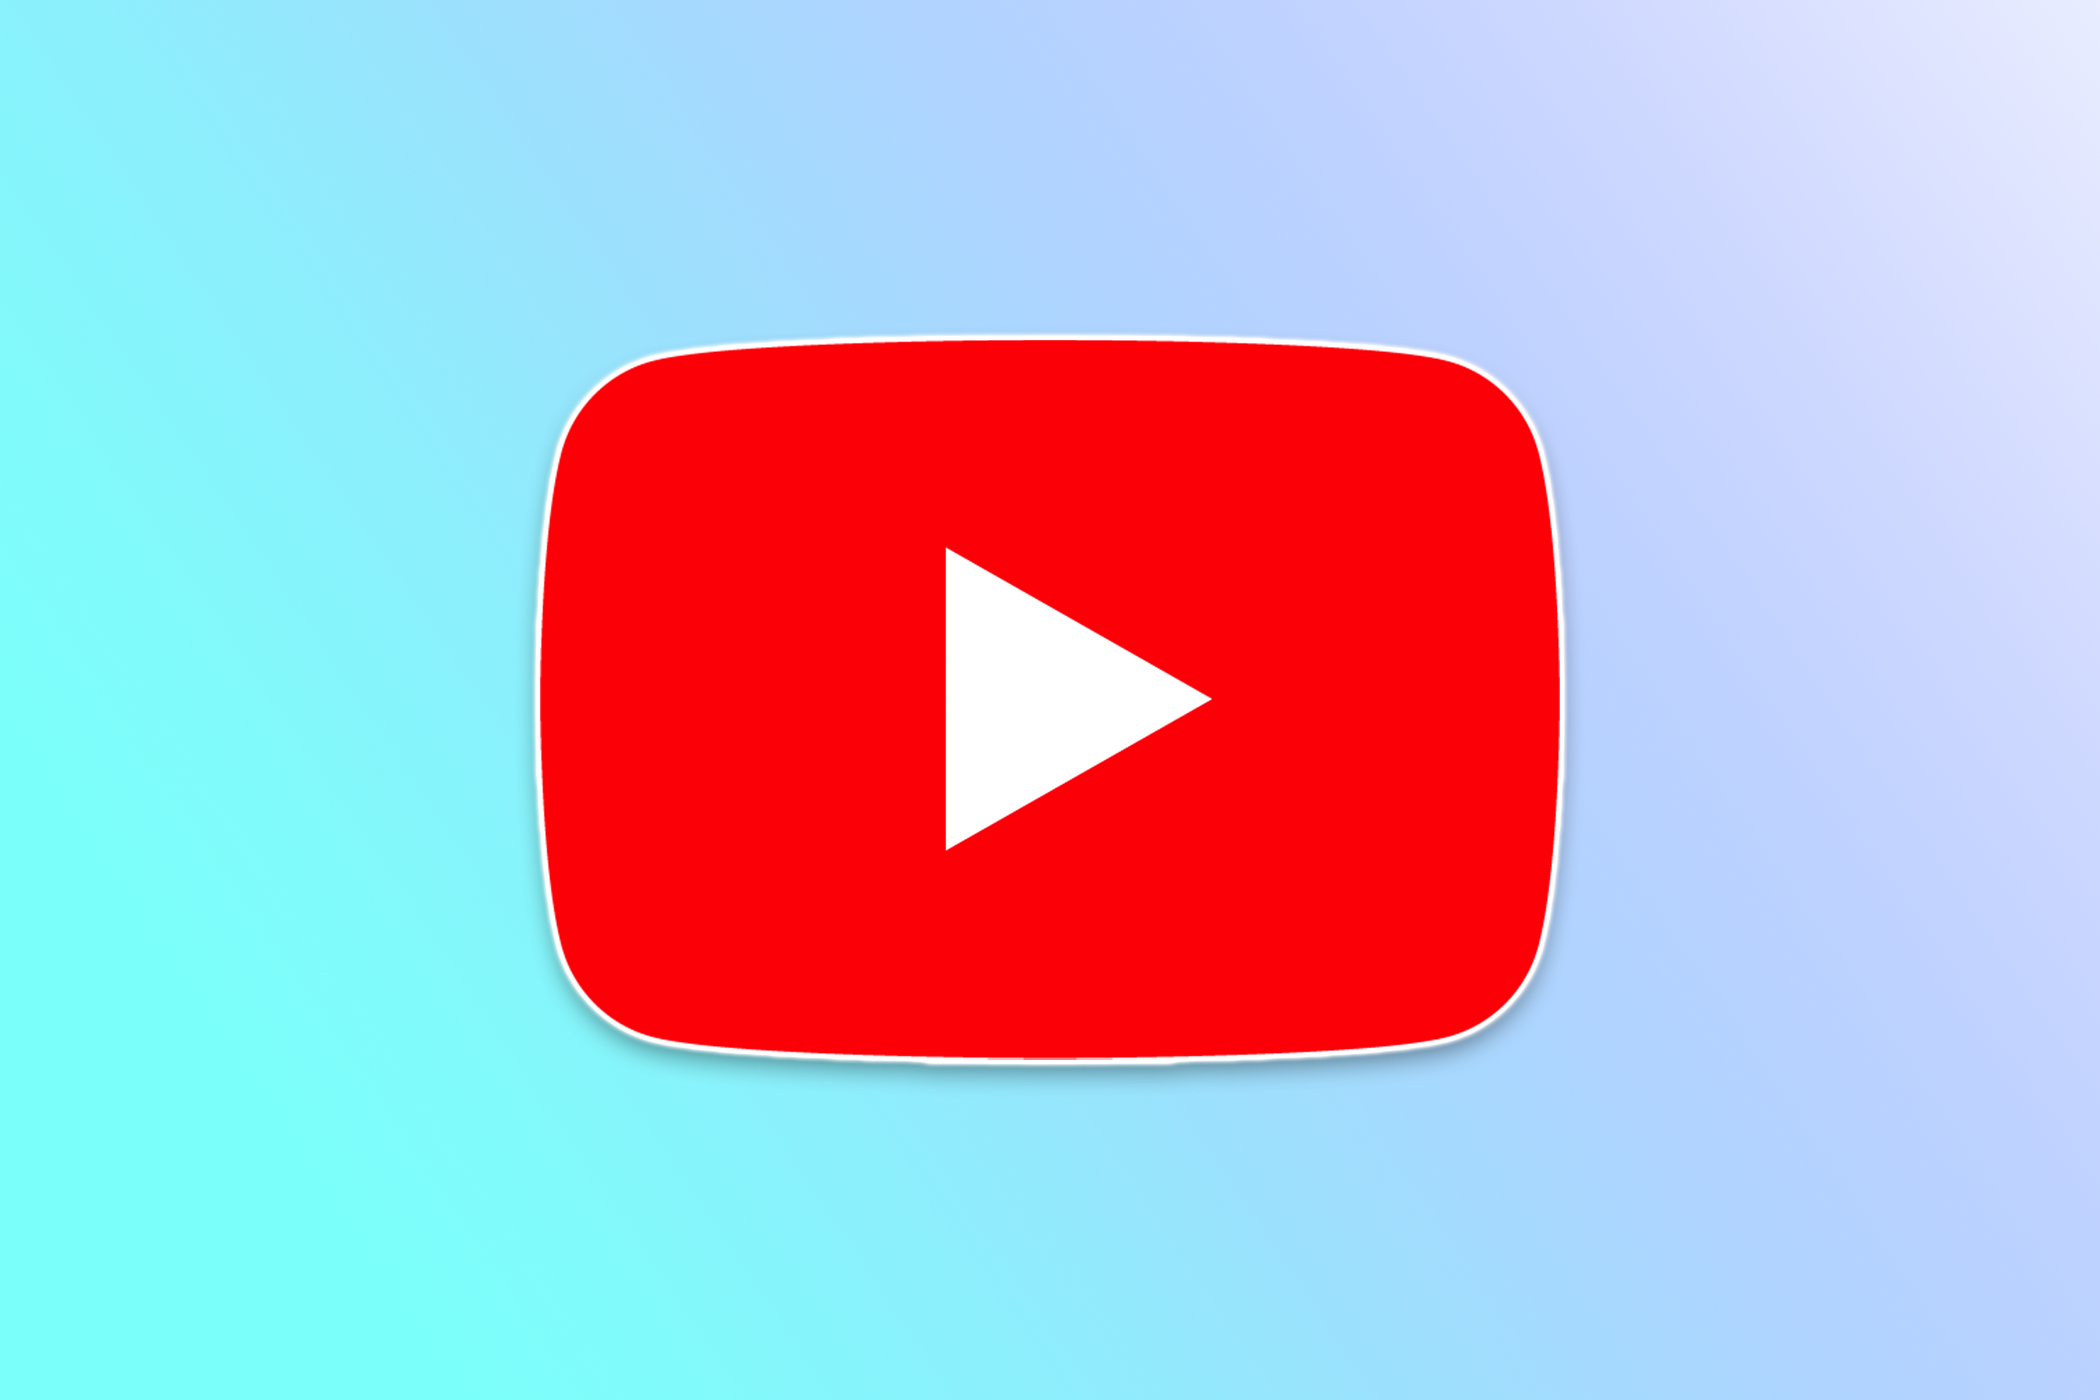 The YouTube logo over a colorful background.